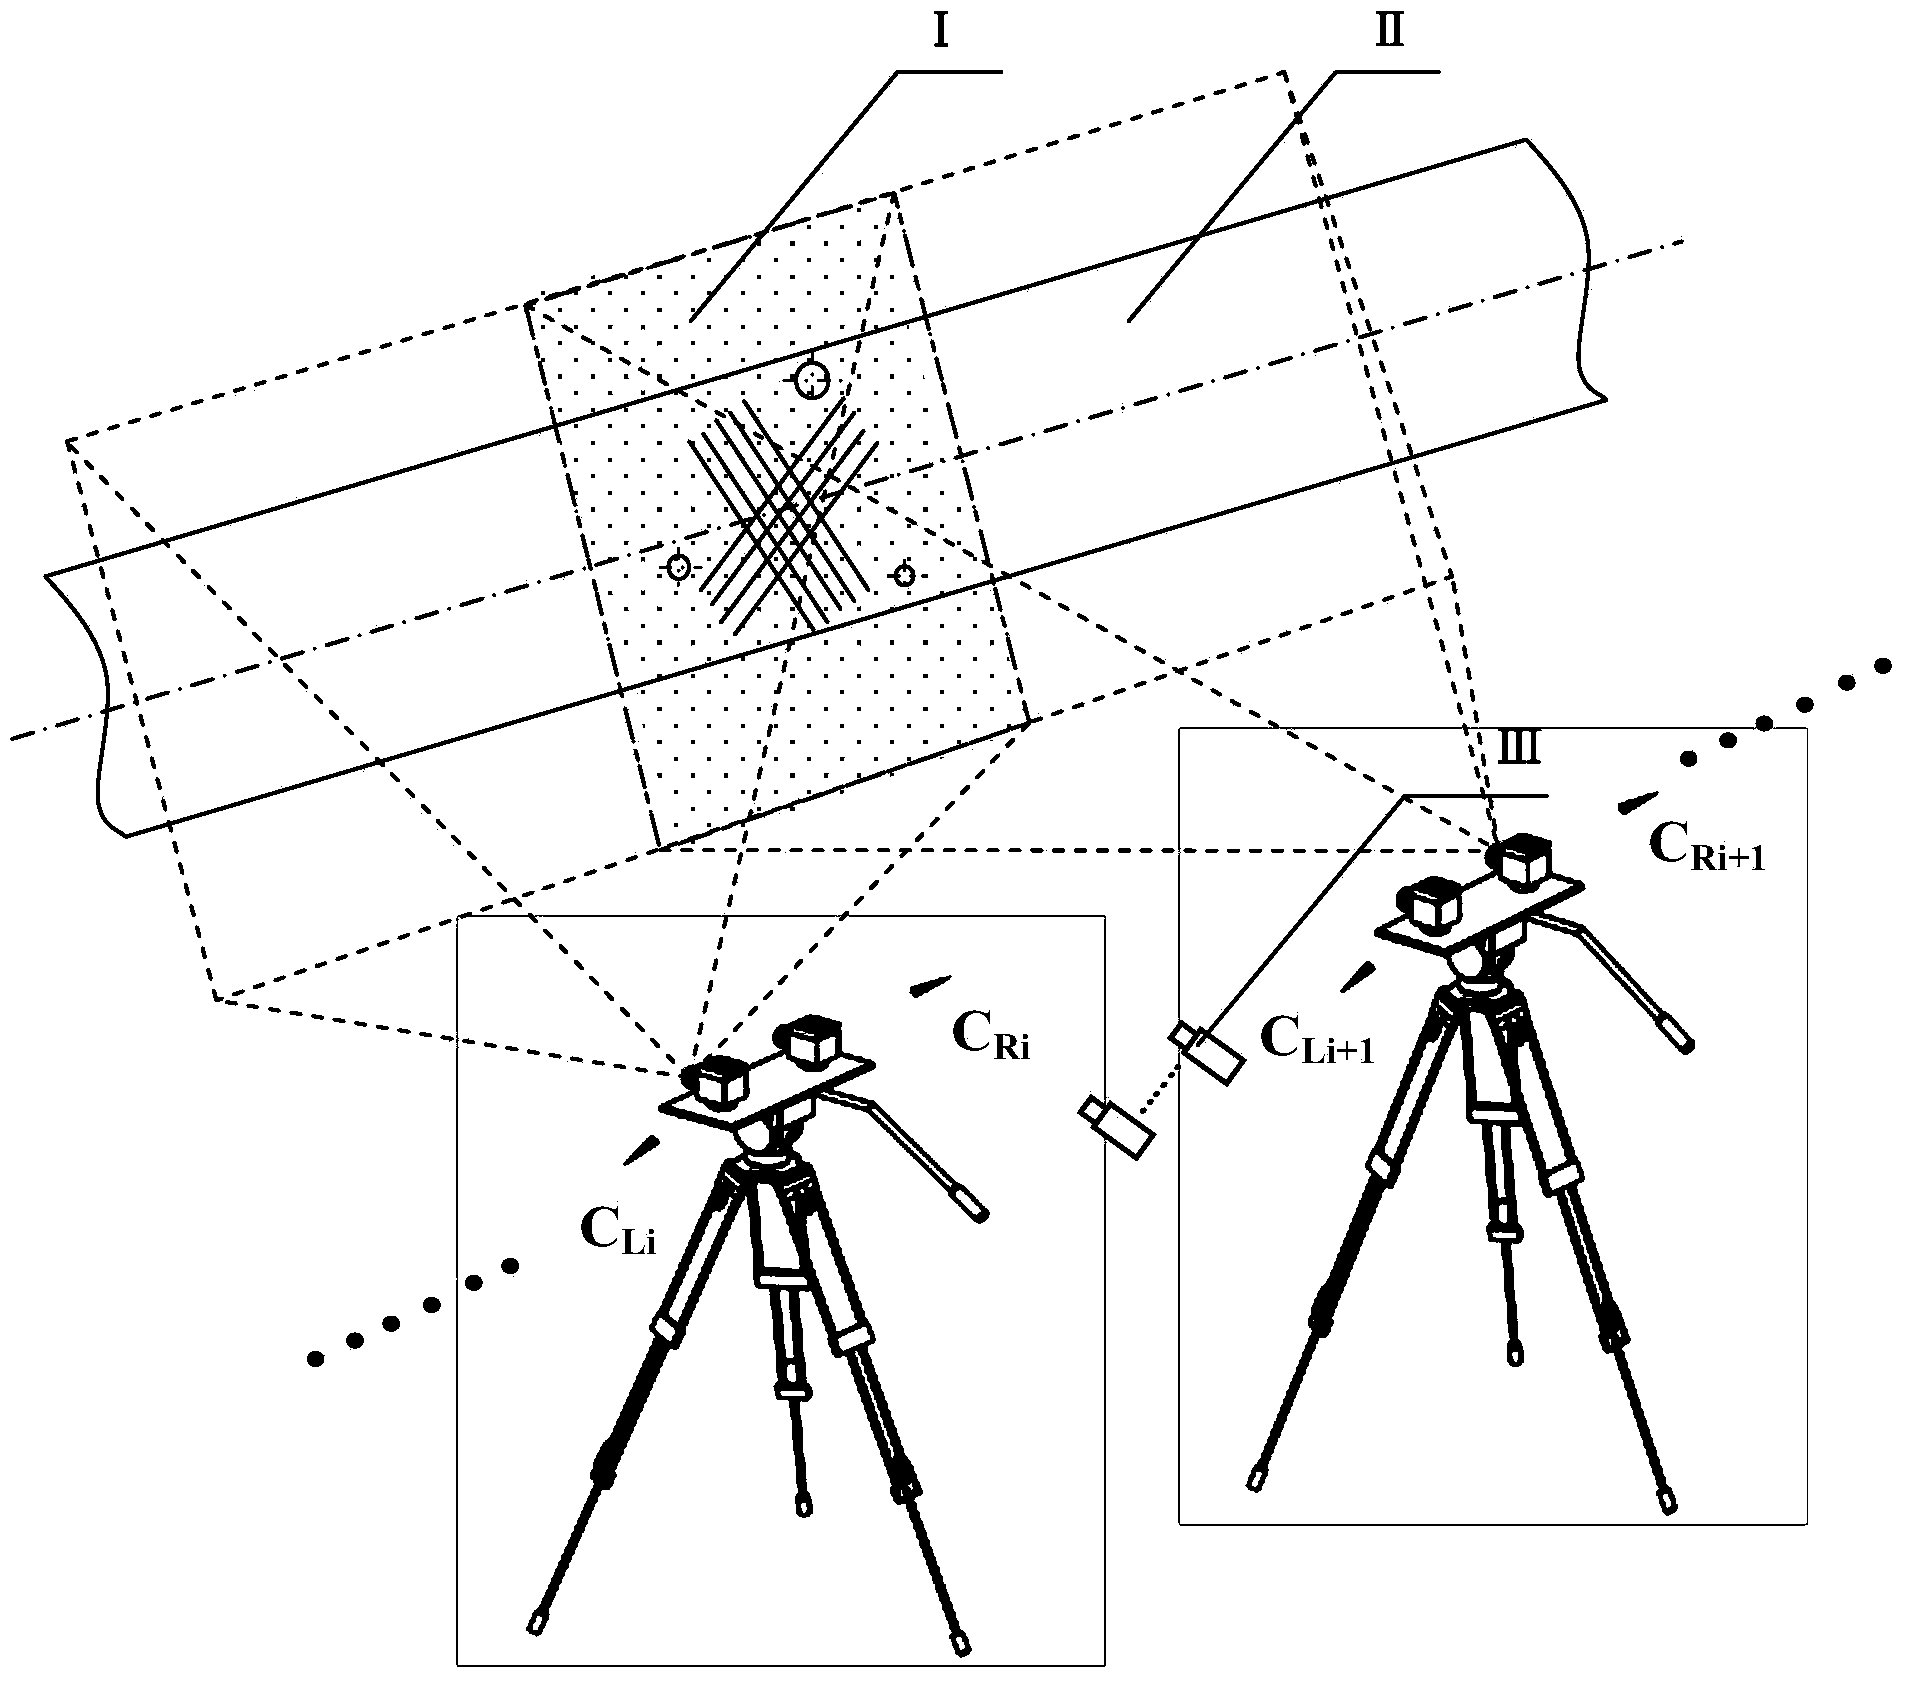 Splicing method for measuring image data with large forgings assisted by lasers